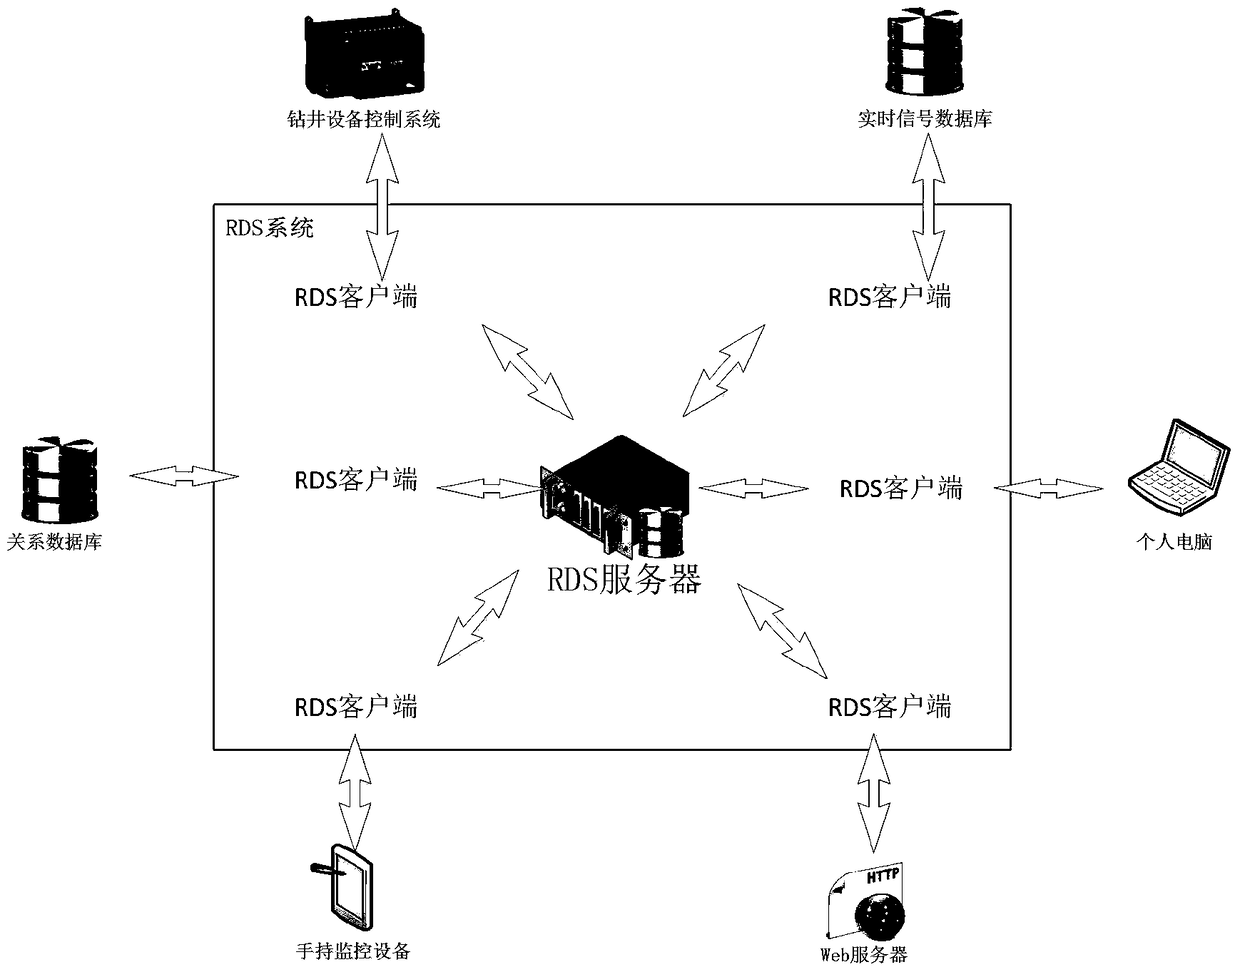 Real-time data service system and data interaction method based on drilling industry